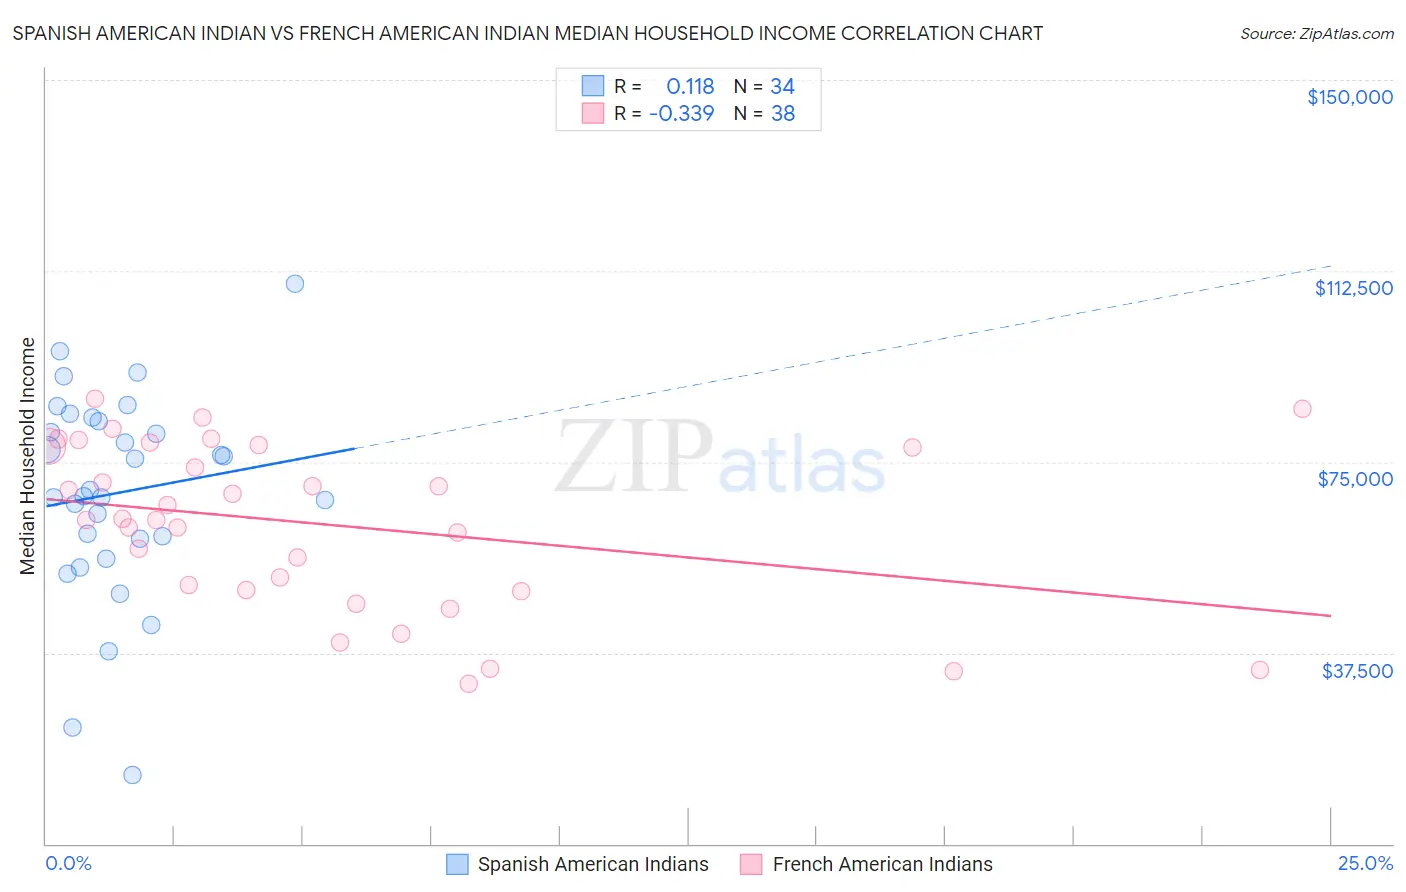 Spanish American Indian vs French American Indian Median Household Income